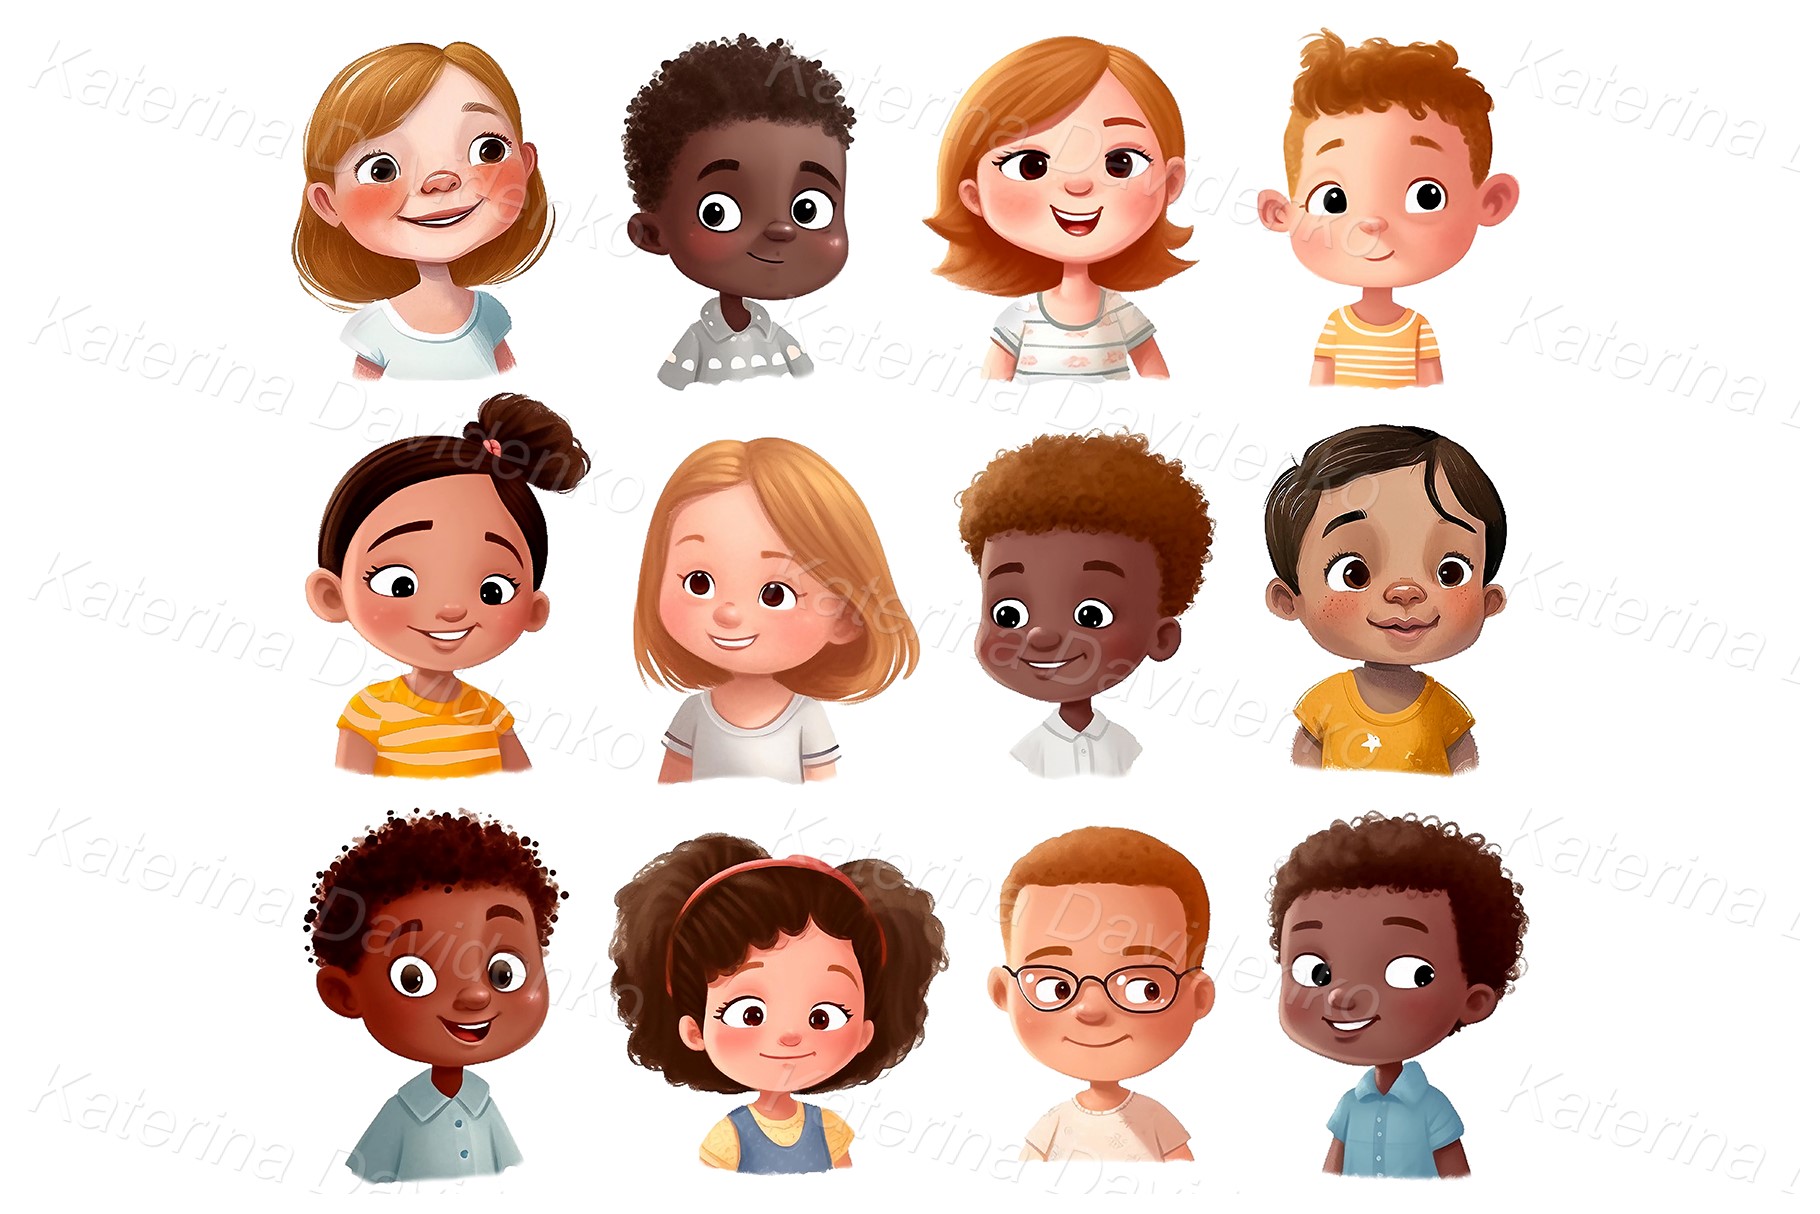 Collection of cute cartoon kids avatars PNG clipart. Children's faces set, boys and girls